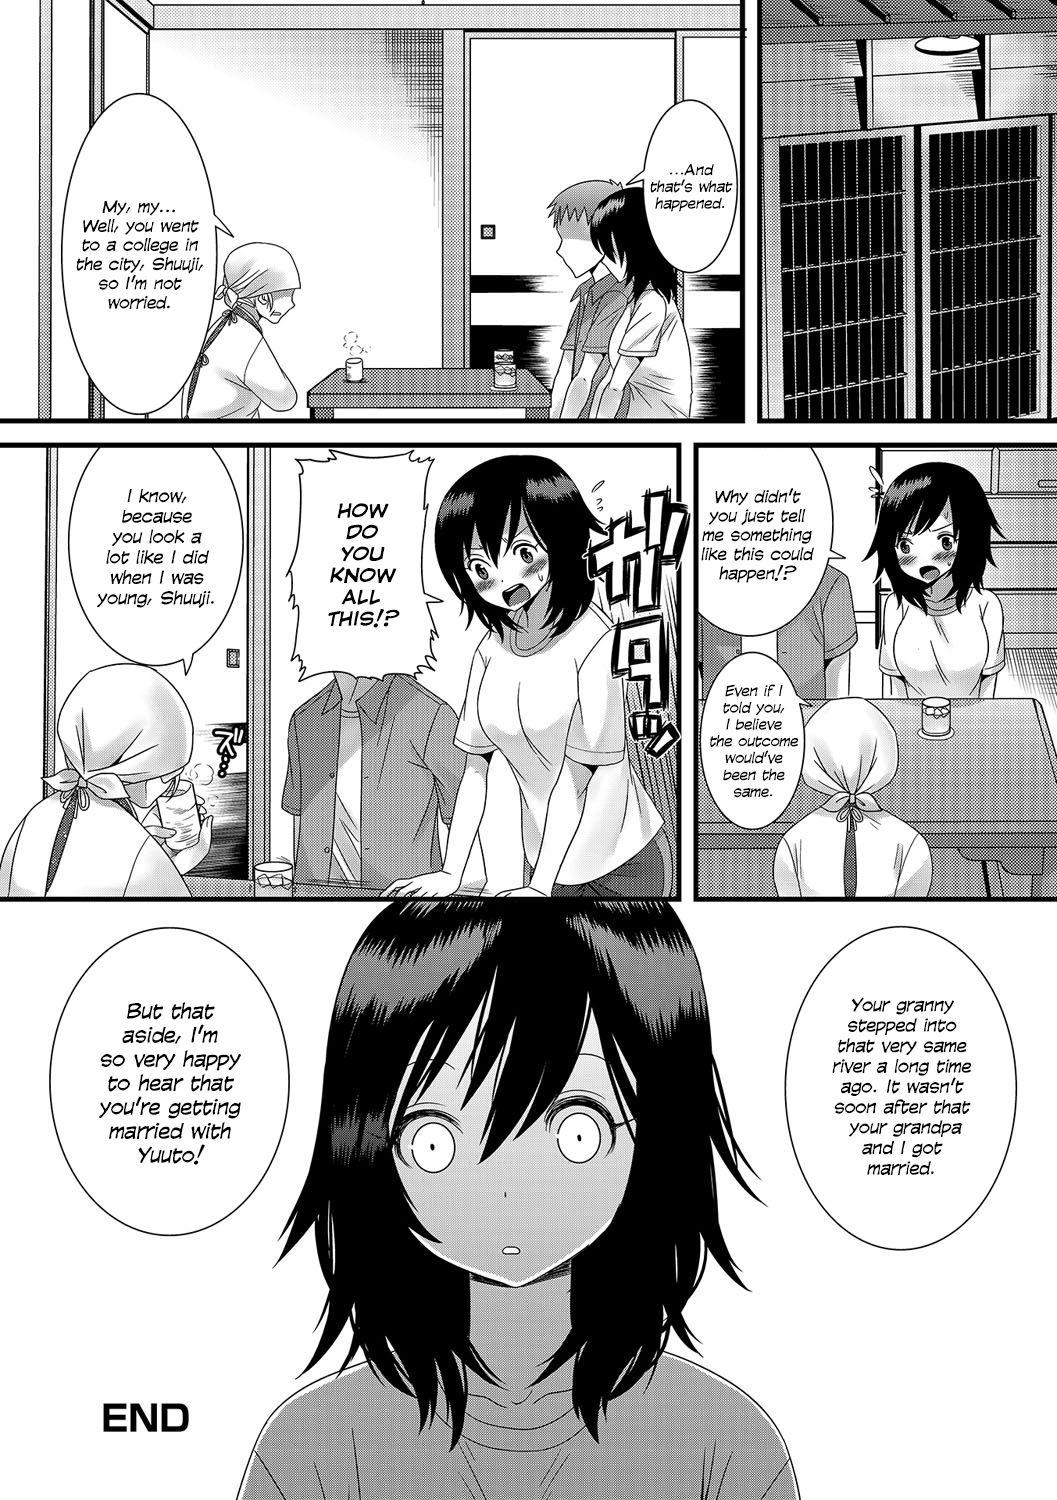 Dick Suck Inaka no Meishin | Country Superstition Old - Page 18